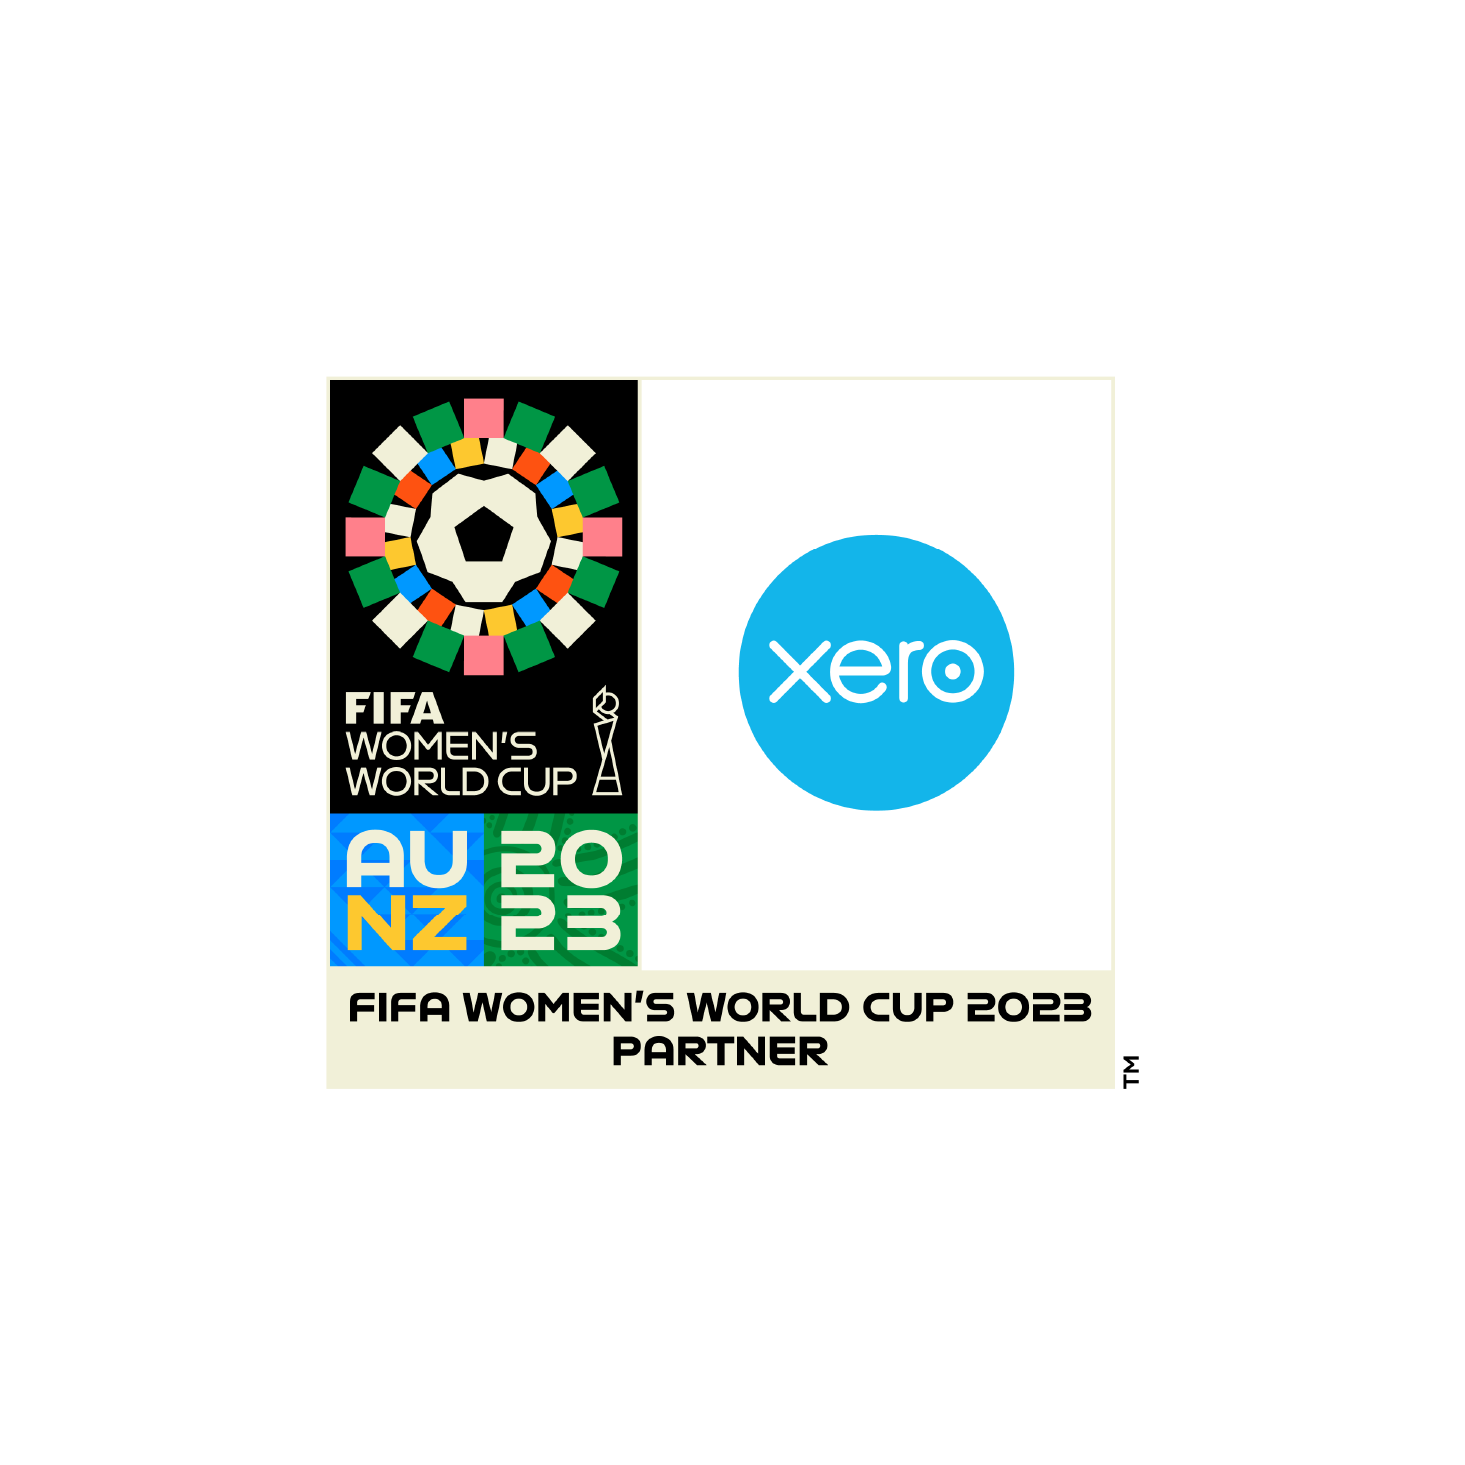 The FIFA Women’s World Cup logo for AU/NZ 2023, and the Xero logo